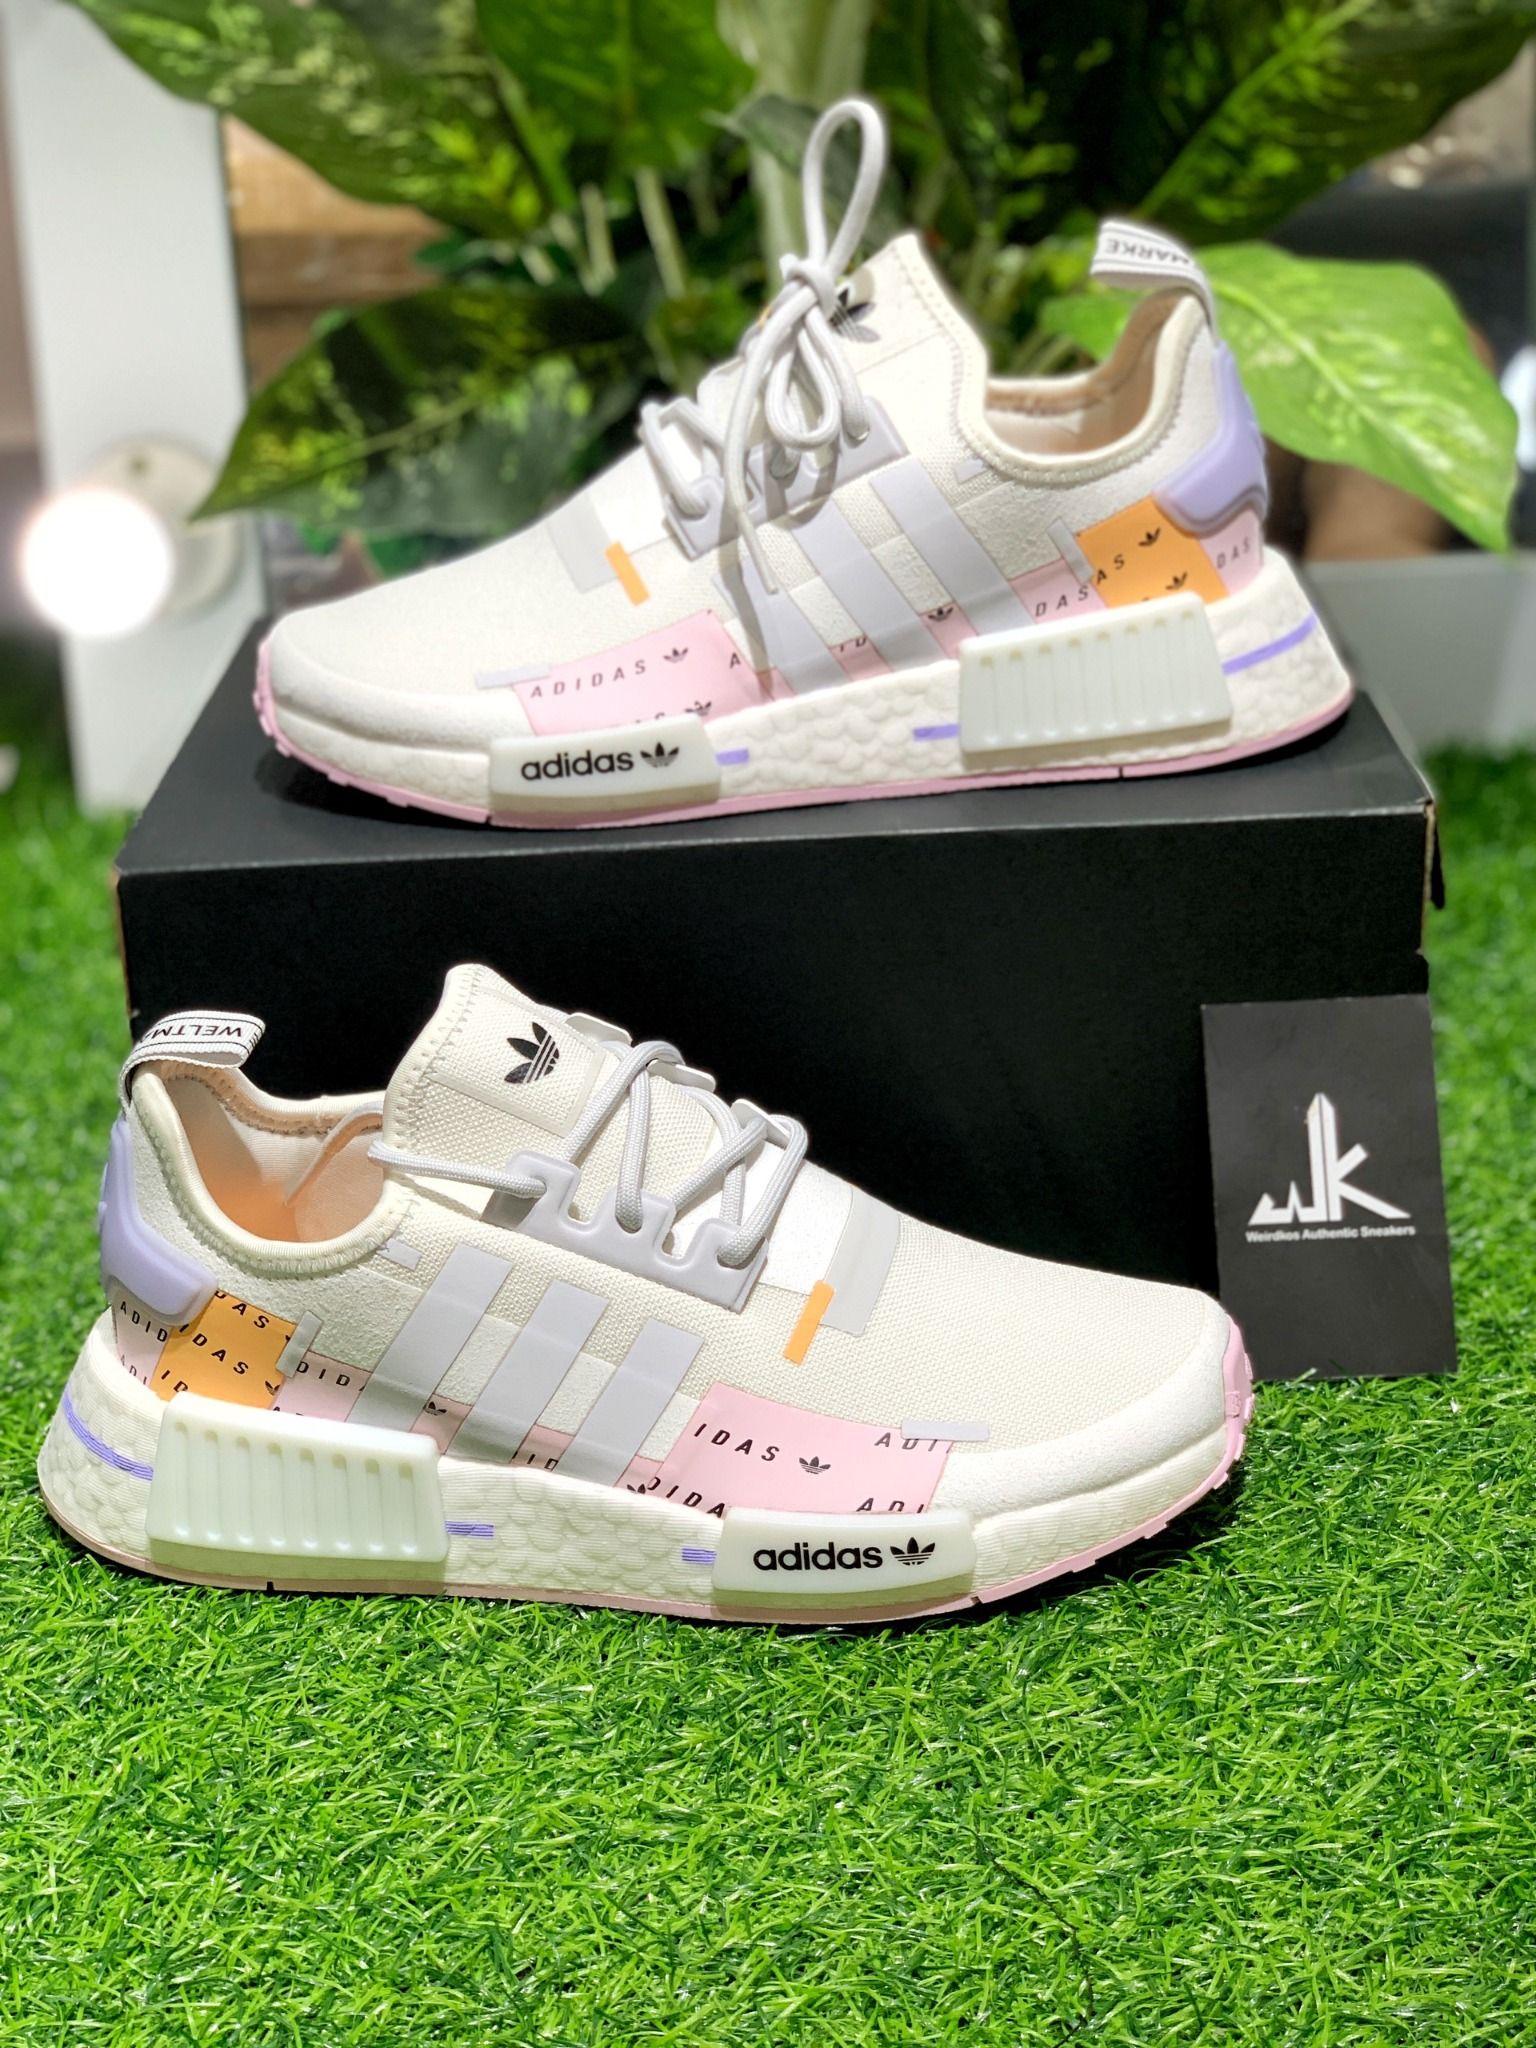  GZ8013 NMD R1 Crystal White Clear Pink 